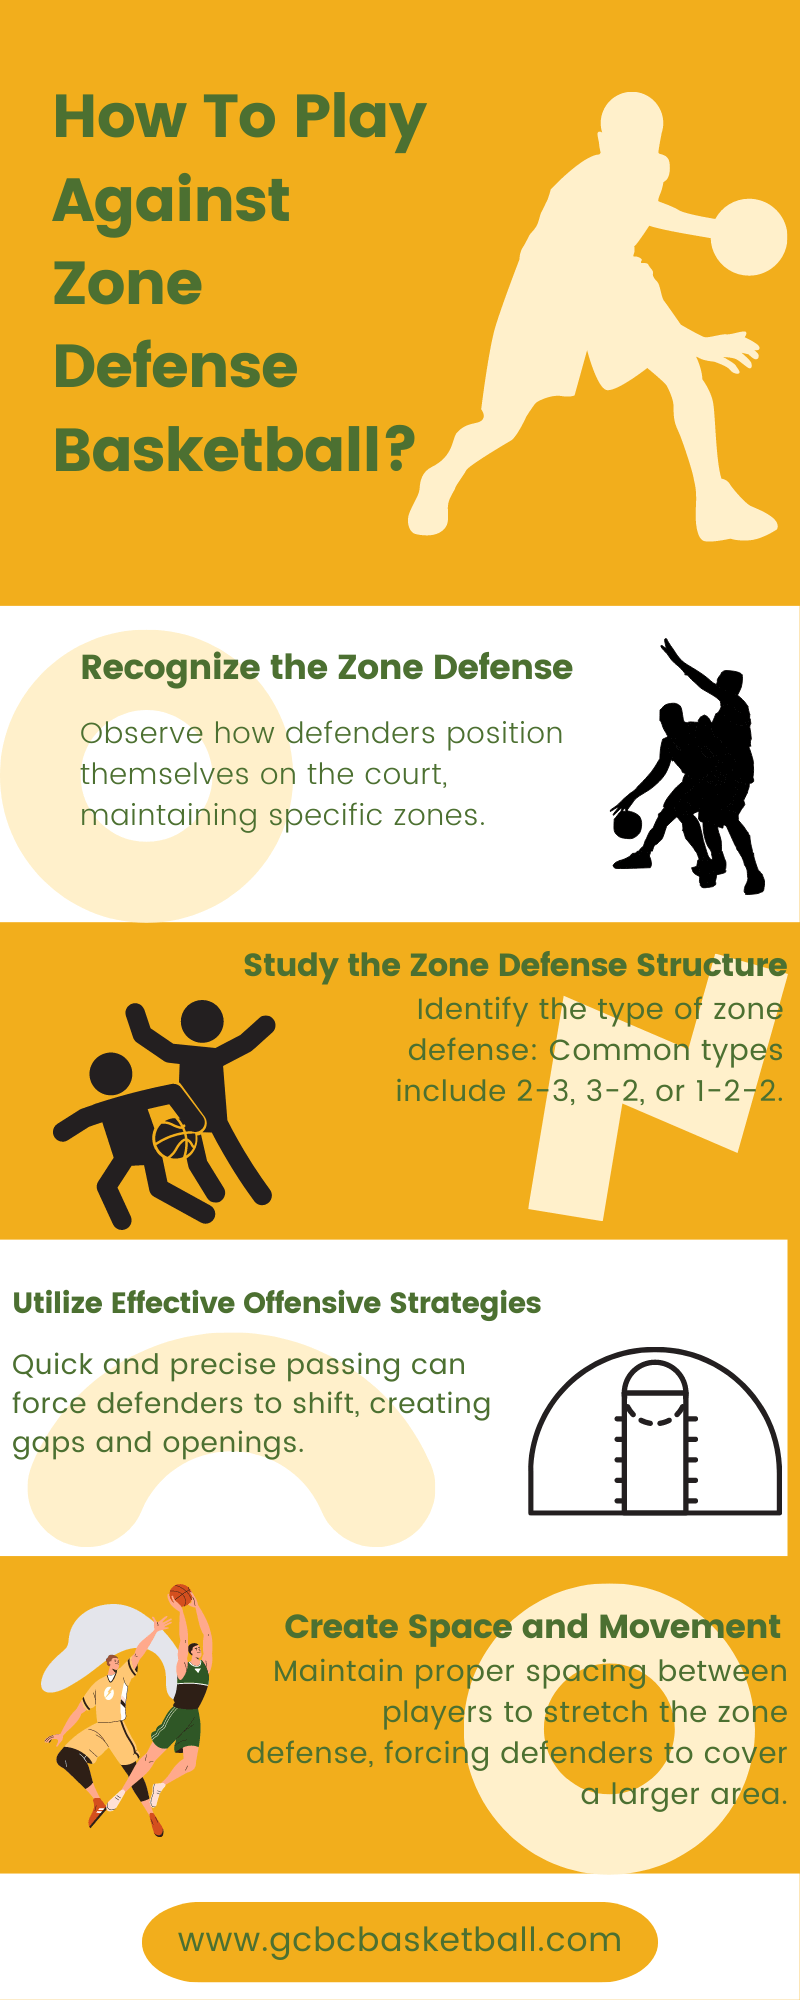 Play Against Zone Defense Basketball